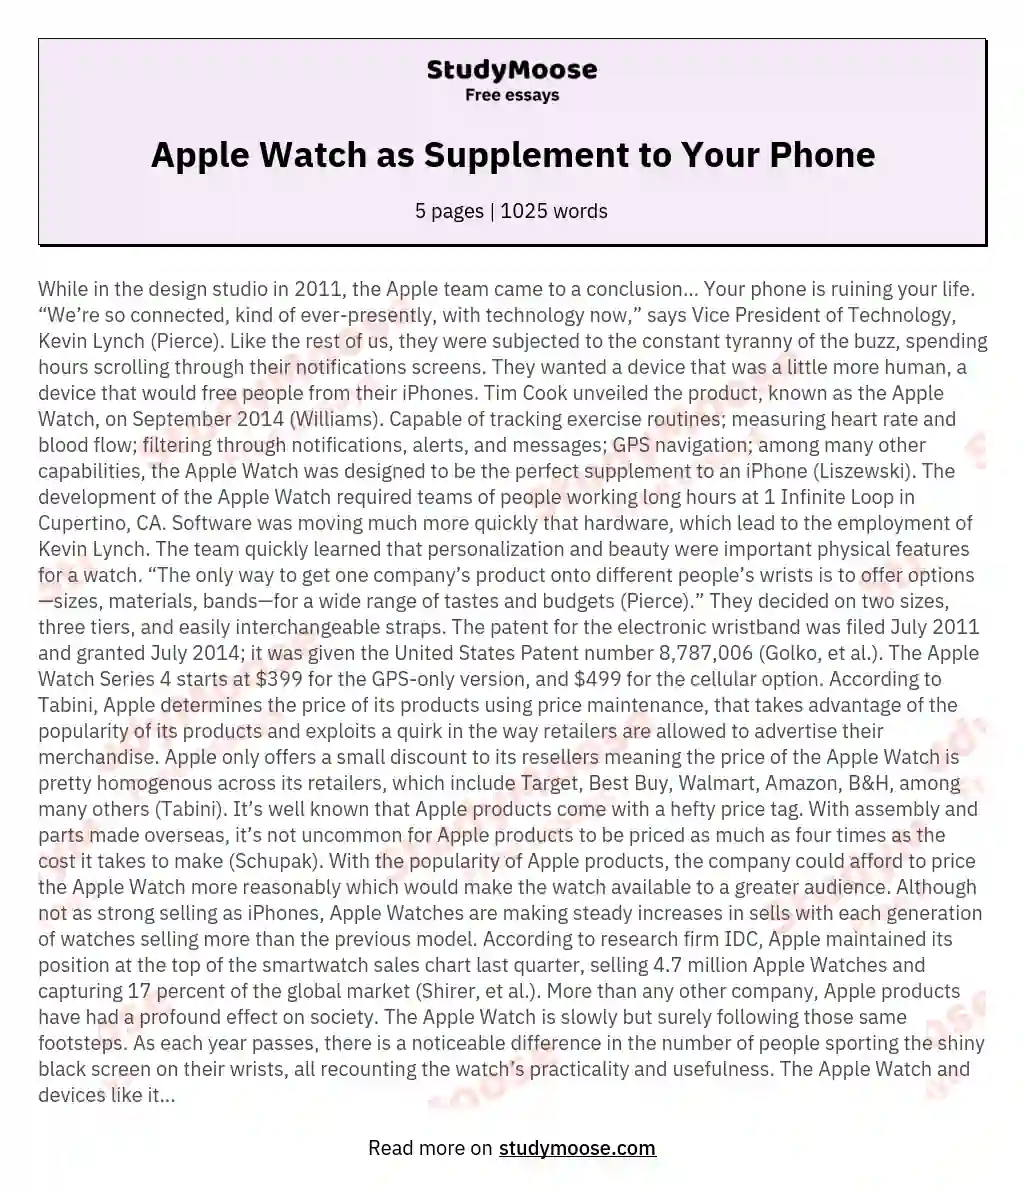 Apple Watch as Supplement to Your Phone essay